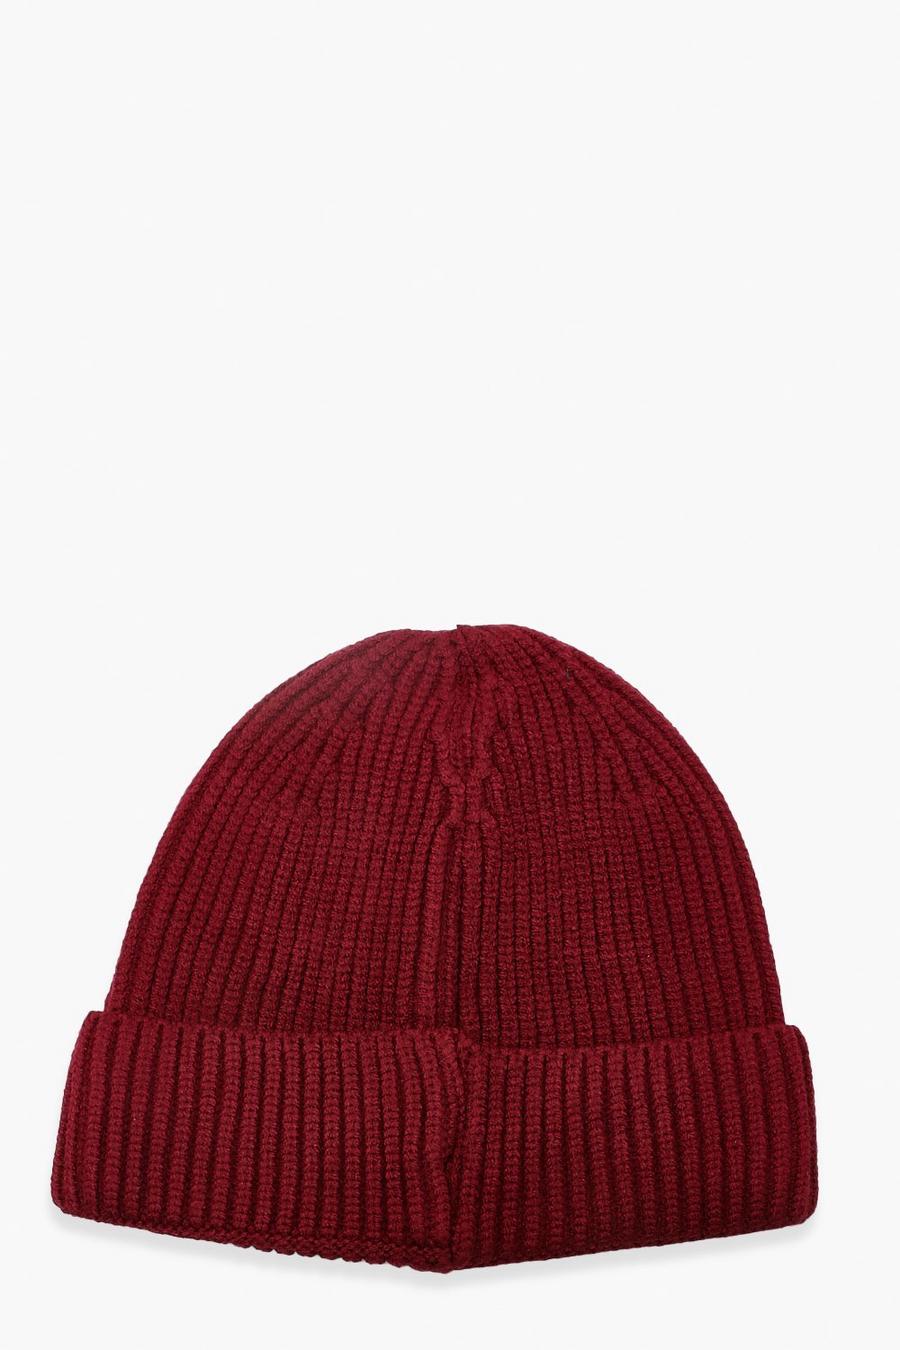 Berretto Beanie a coste bordeaux, Burgundy image number 1